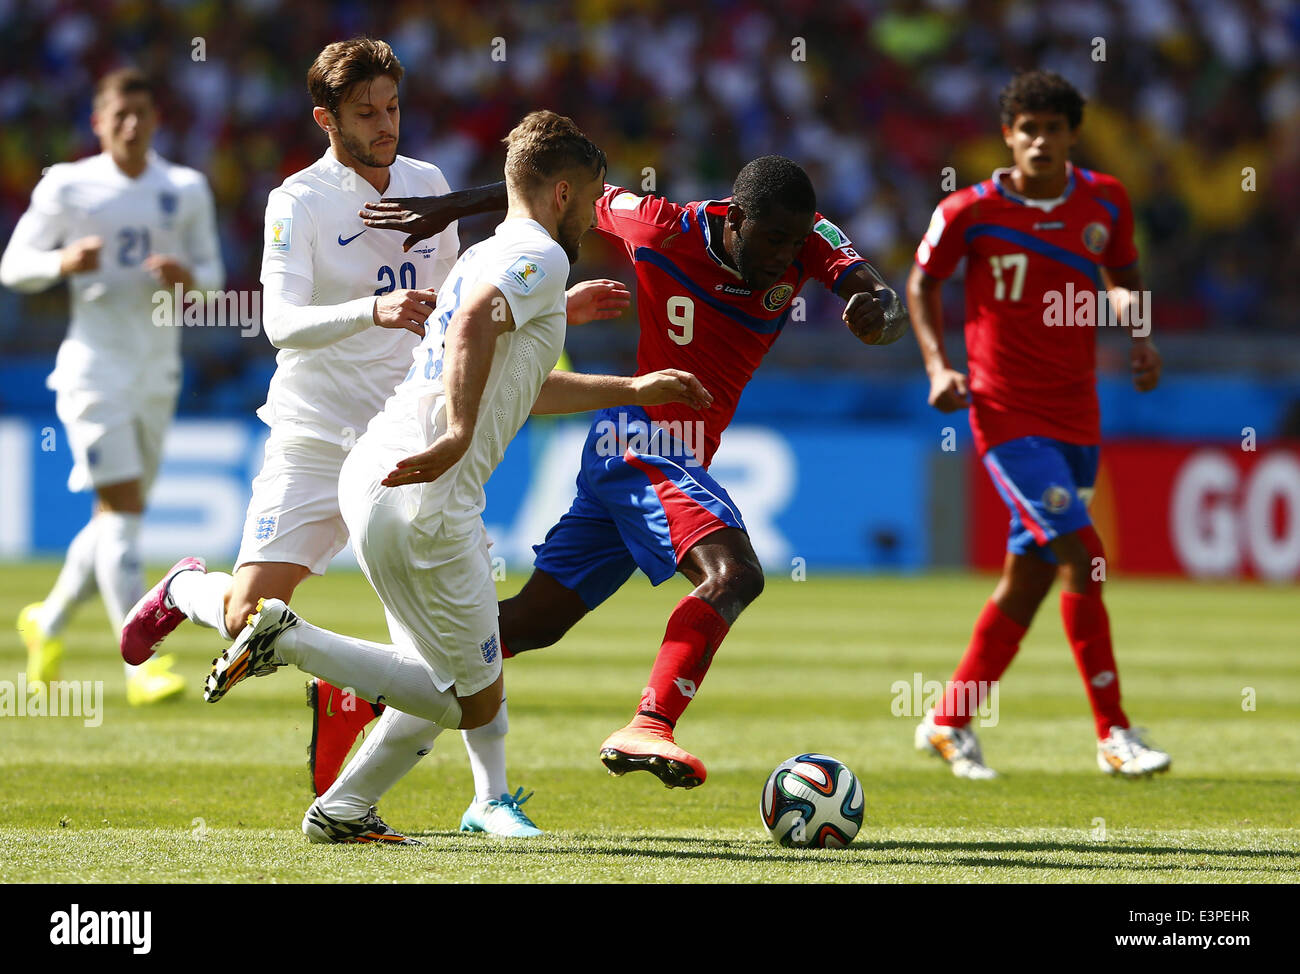 Belo Horizonte, Brazil. 24th June, 2014. Costa Rica's Joel Campbell (2nd R) breaks through during a Group D match between Costa Rica and England of 2014 FIFA World Cup at the Estadio Mineirao Stadium in Belo Horizonte, Brazil, on June 24, 2014. © Liu Bin/Xinhua/Alamy Live News Stock Photo